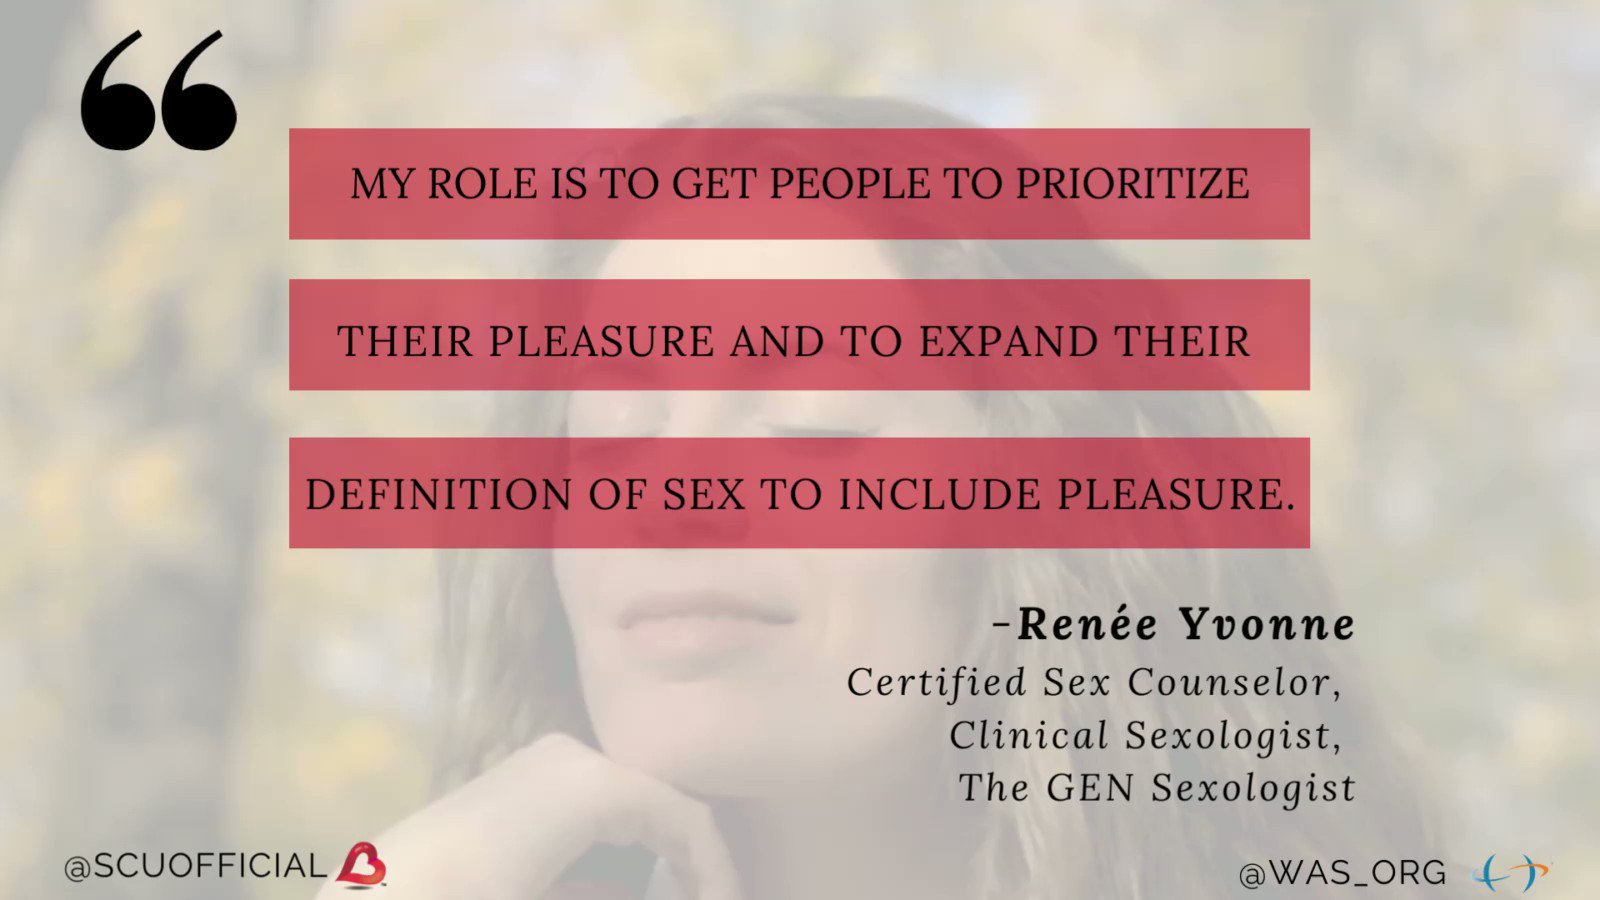 Sex Coach U On Twitter As Sex Coaches We Help Our Clients Prioritize